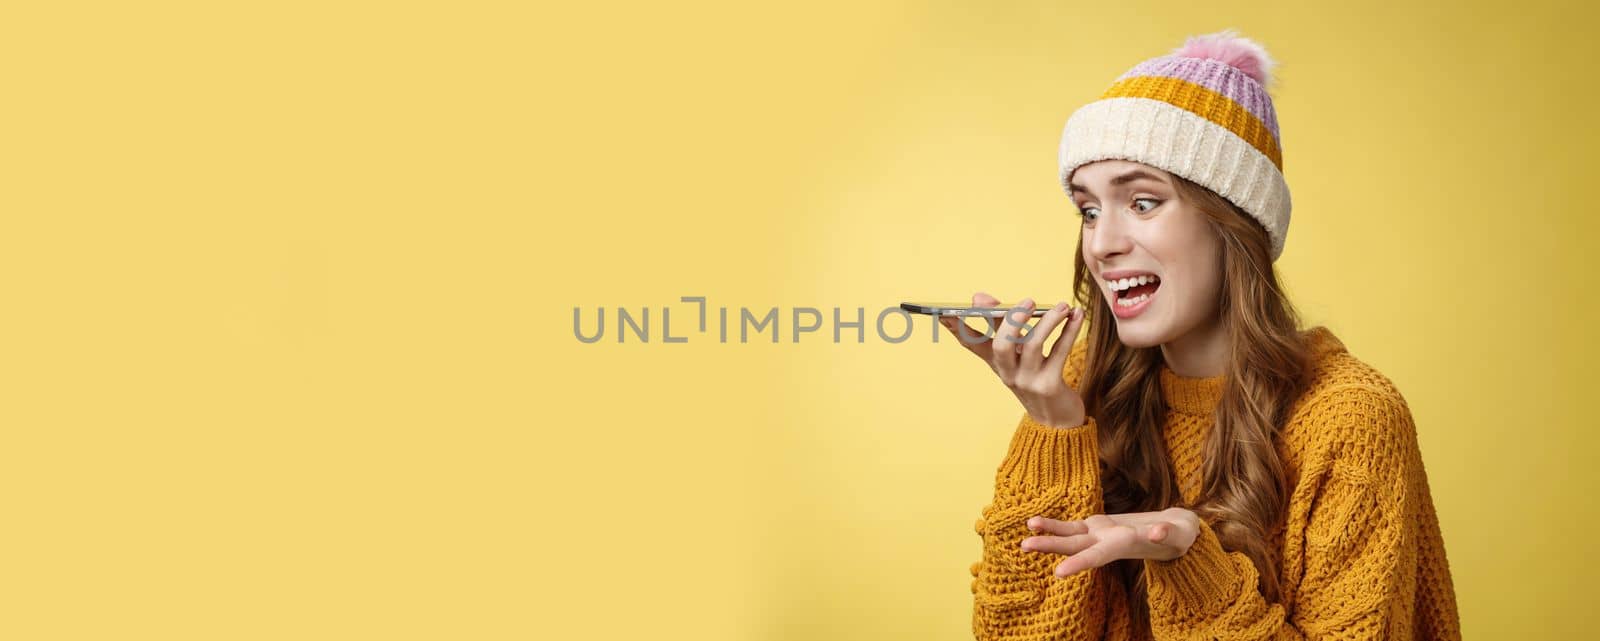 Close-up annoyed angry young woman shouting phone recording audio message irritated arguing having fight friend, raise hand dismay screaming freaked-out, yellow background. Copy space